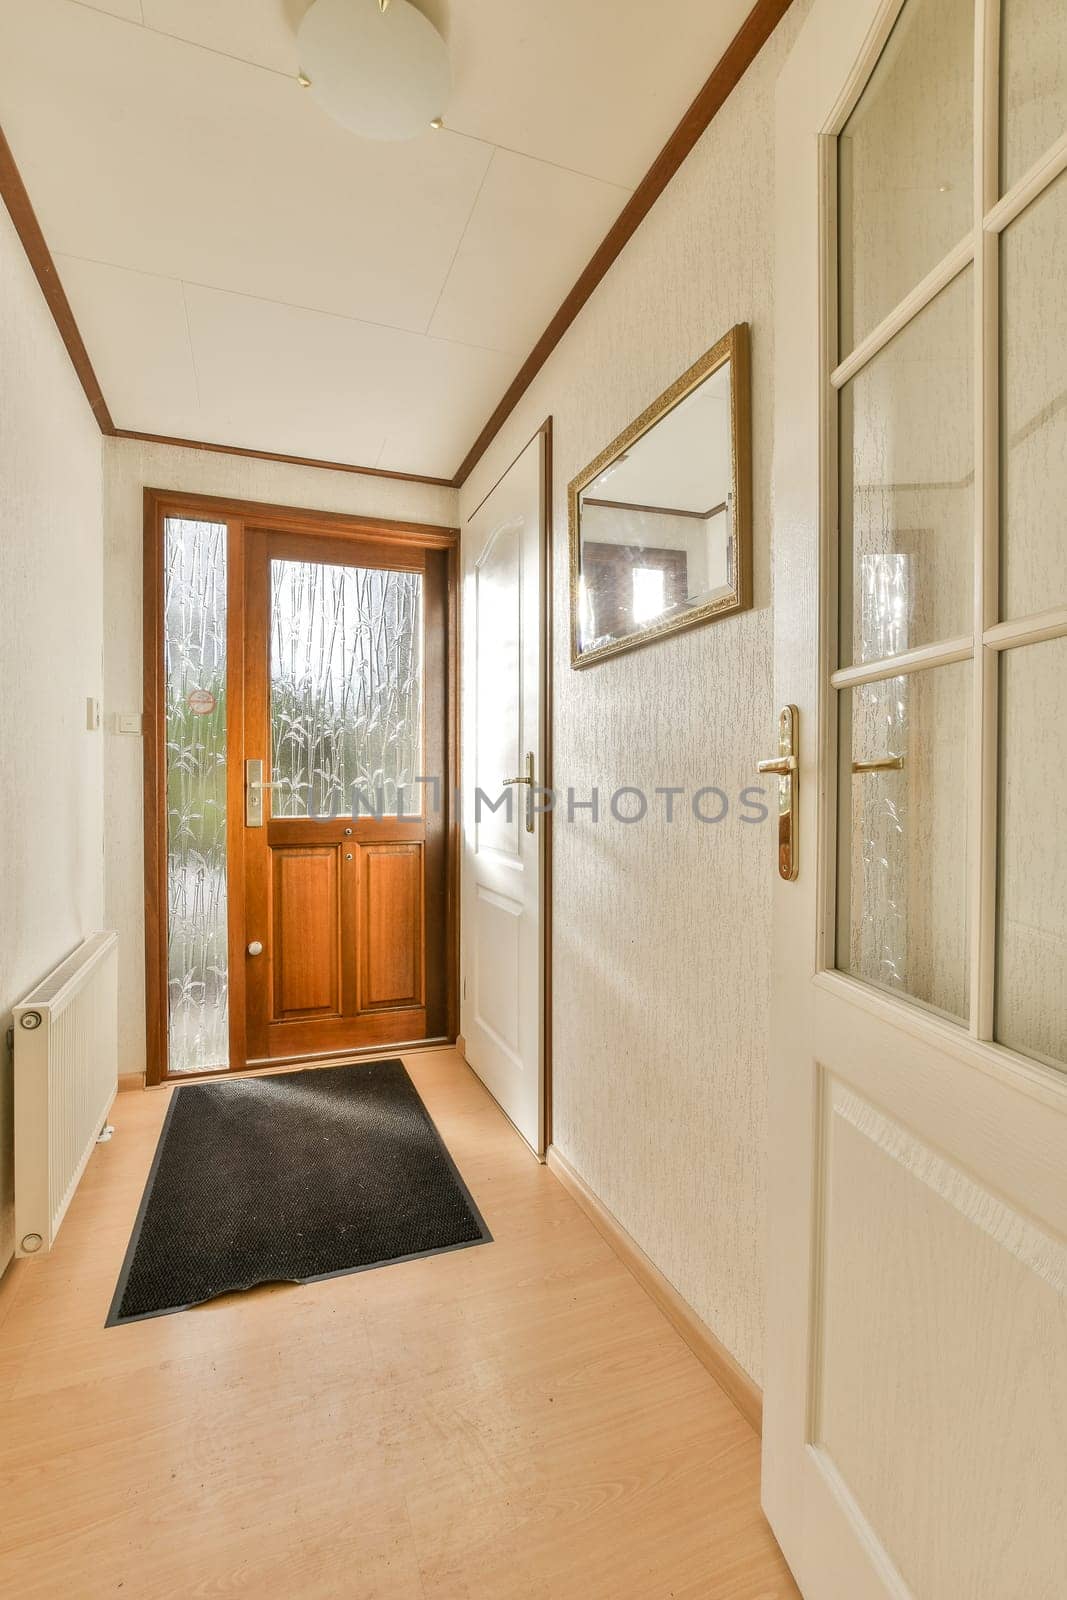 a long hallway with wood flooring and white wallpaper on the walls there is a black rug in front of the door